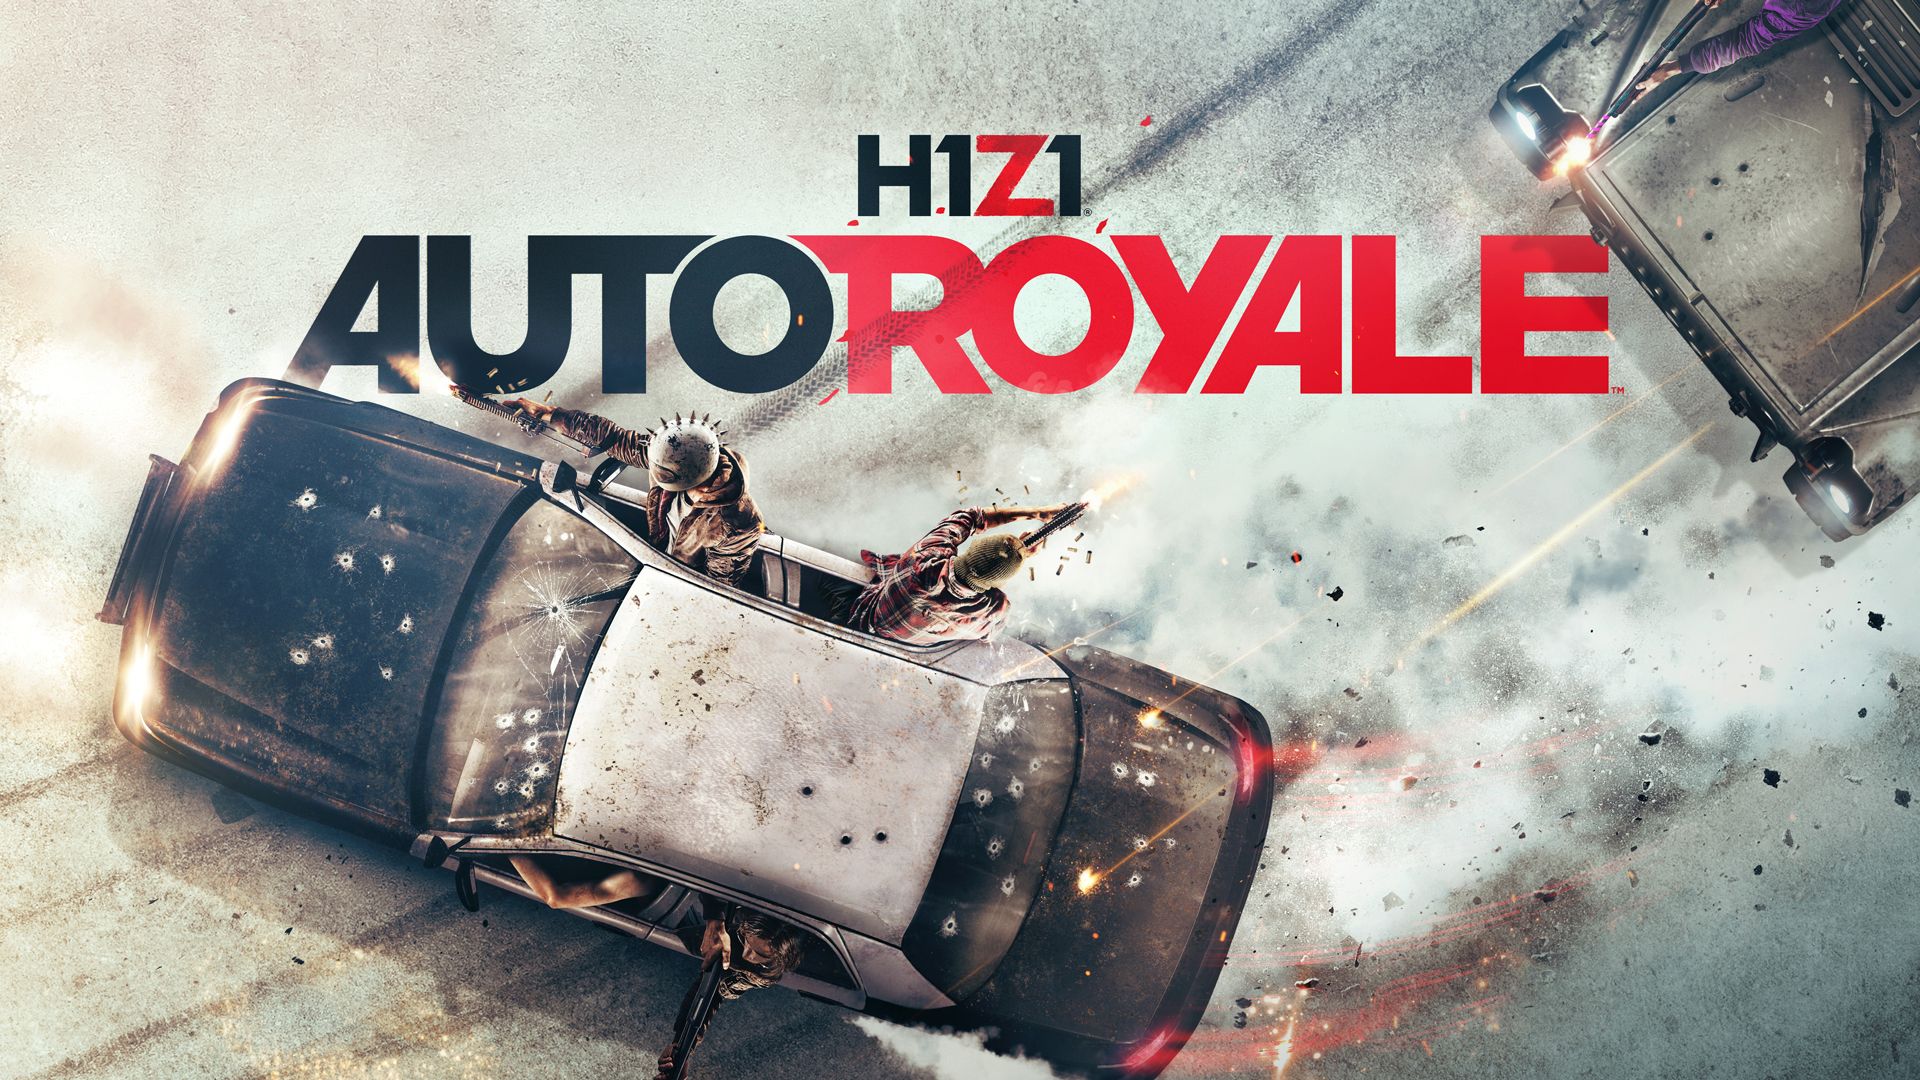 Image for H1Z1 finally leaves Early Access with new vehicular battle royale mode